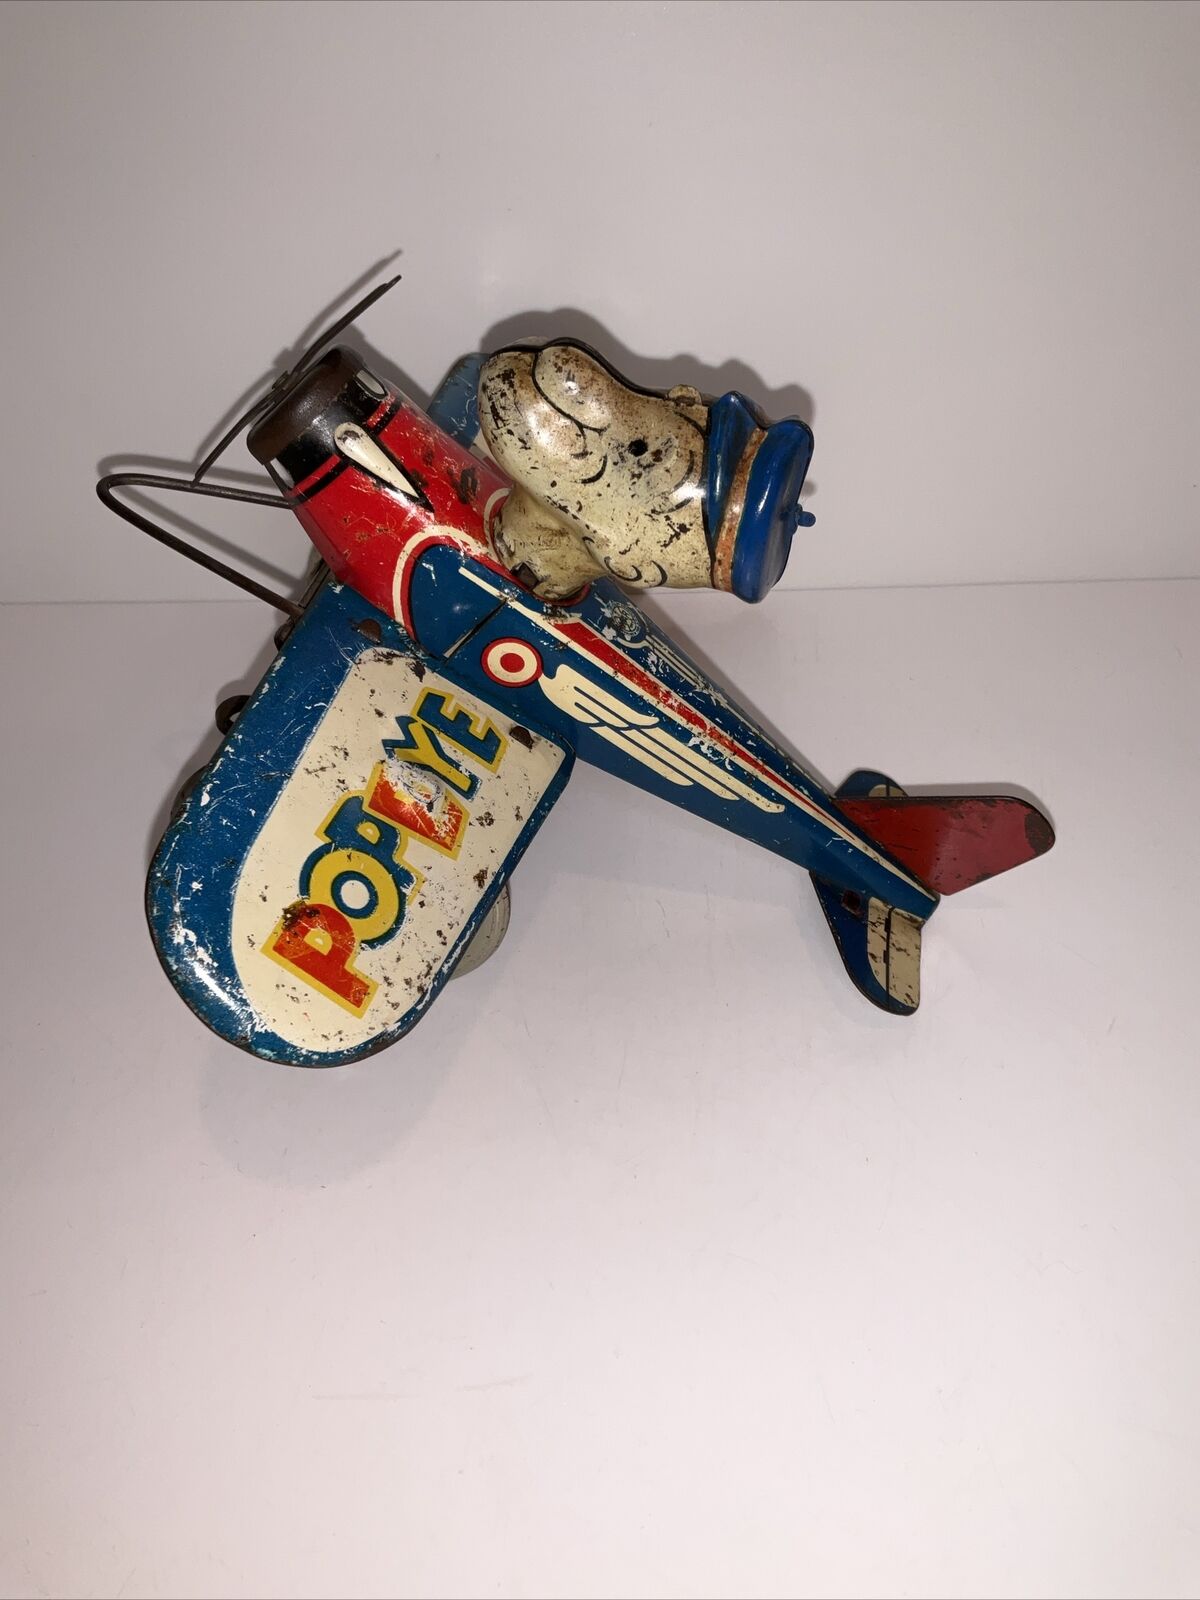 Antique 1940s Popeye The Sailor Man Pilot Tin Wind-Up Marx Airplane Toy AS IS